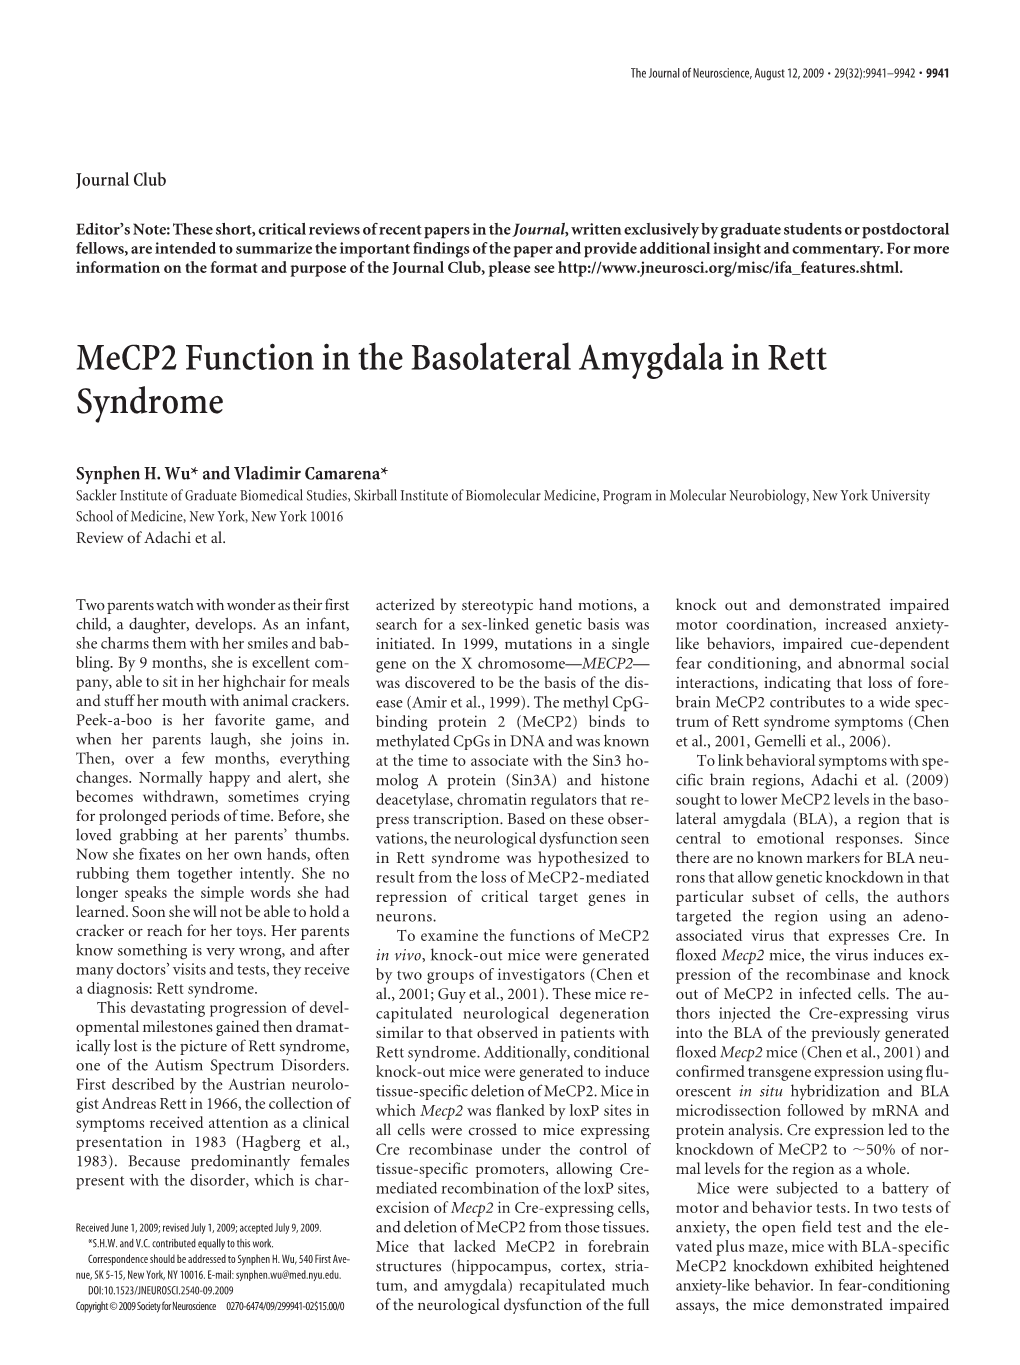 Mecp2 Function in the Basolateral Amygdala in Rett Syndrome